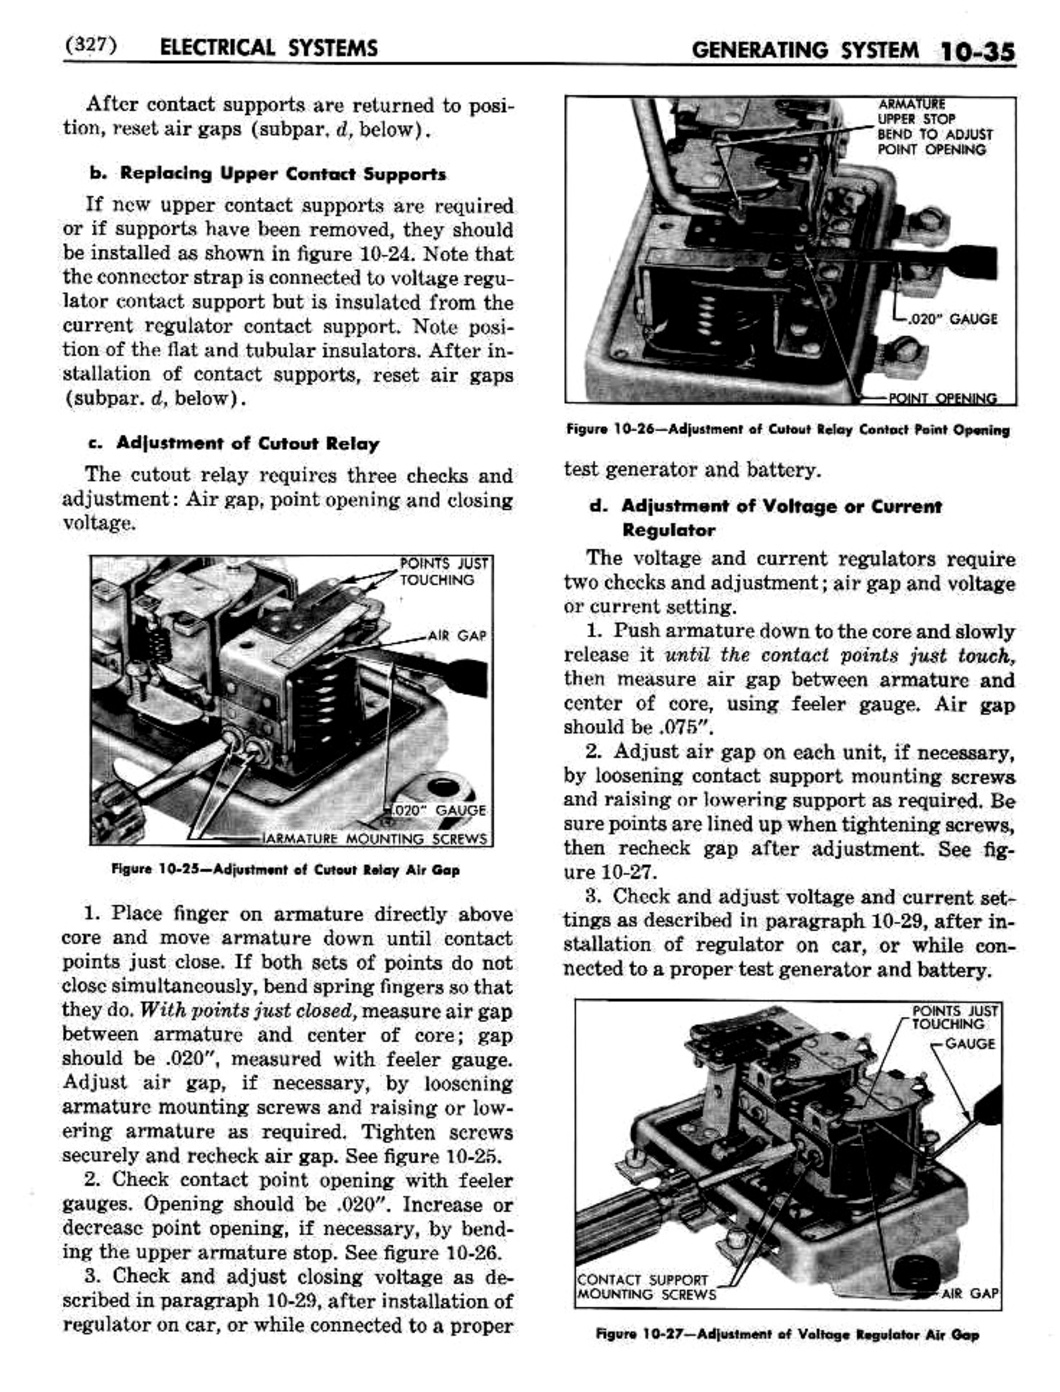 n_11 1951 Buick Shop Manual - Electrical Systems-035-035.jpg